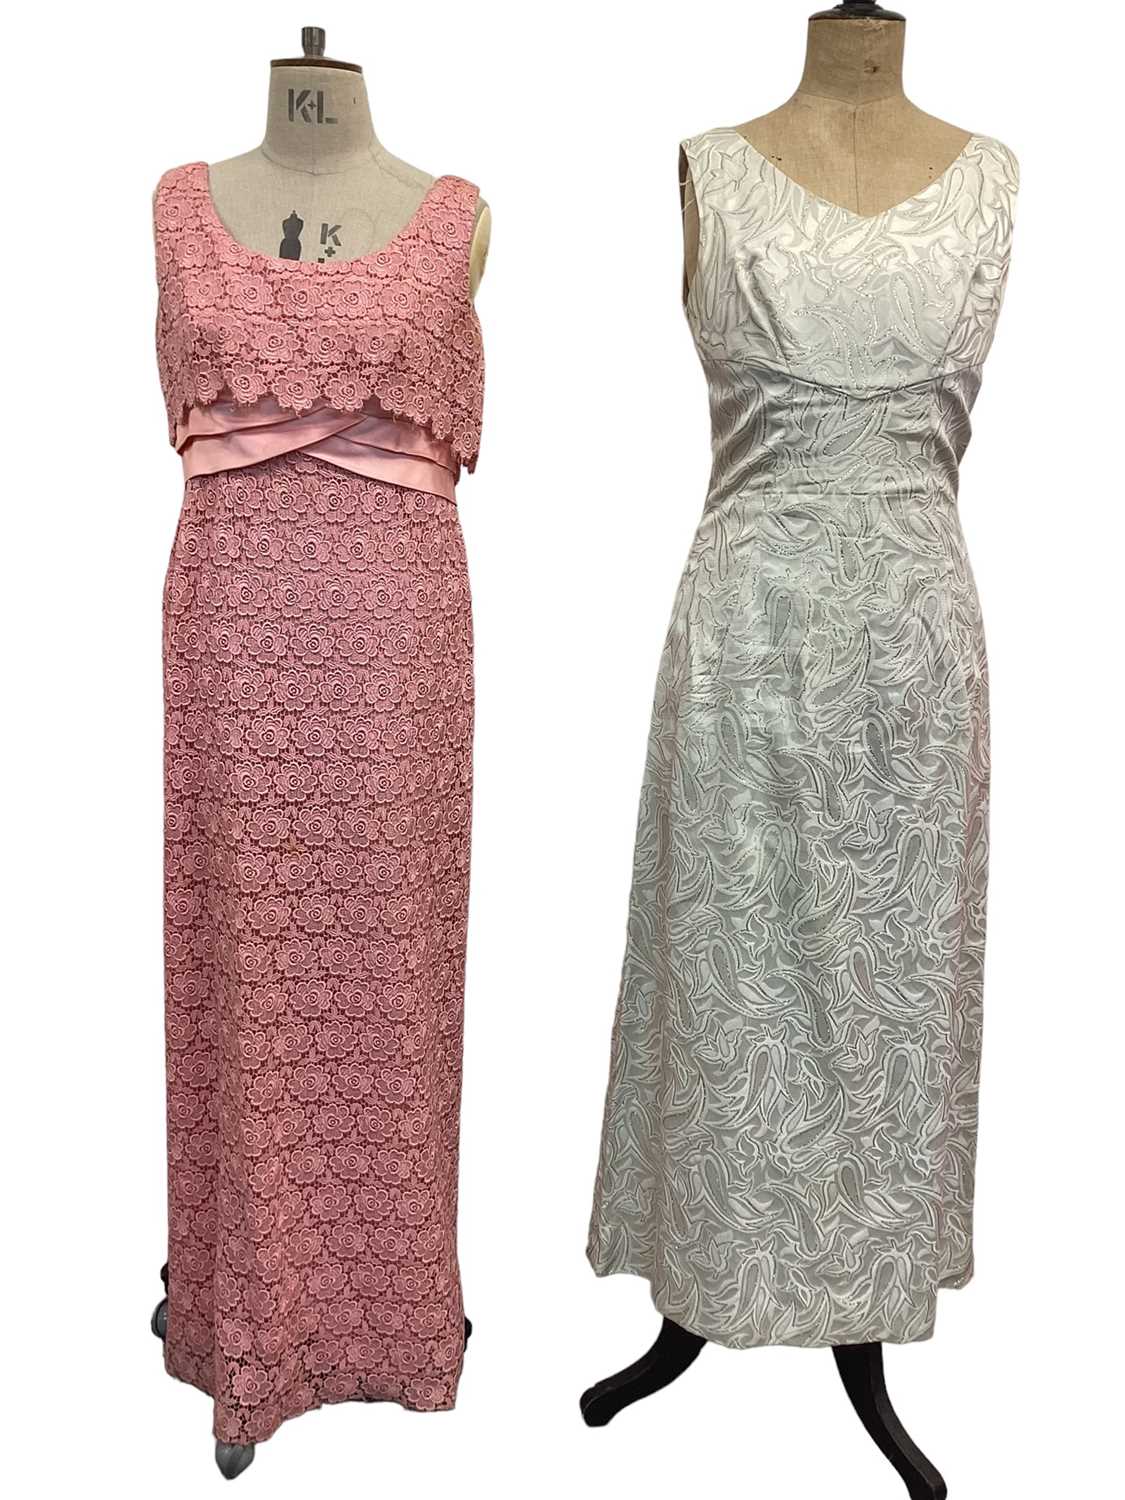 Lot 2098 - 1960's gold lurex empire line column evening dress, similar pink lace evening dress, pink chiffon halter neck maxi with beaded bodice, red and brown heavily beaded evening gown with shoe string str...